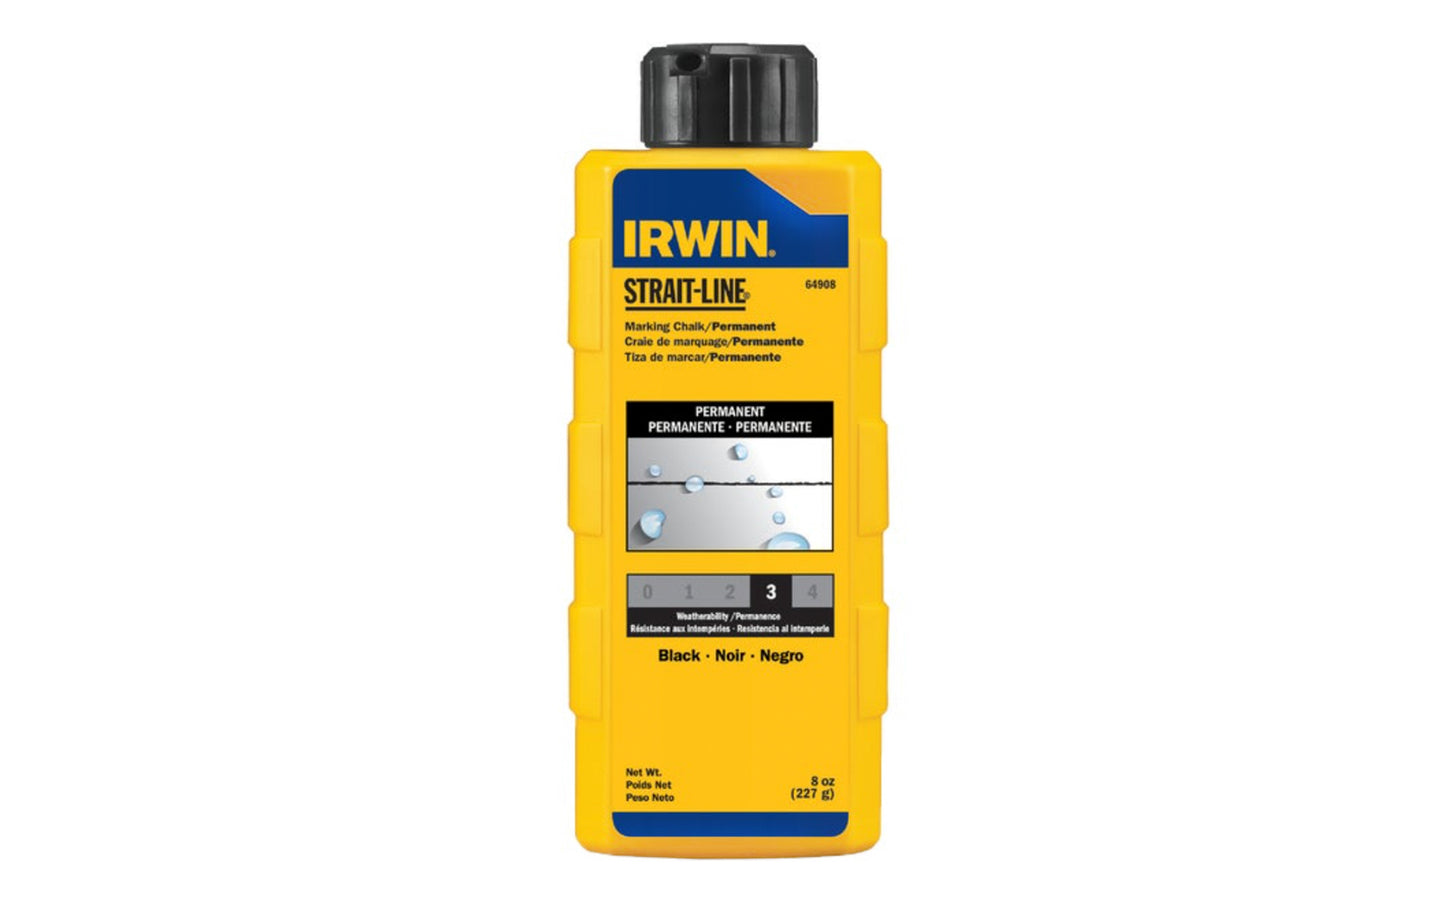 Irwin Strait-Line 8 oz Permanent Black Marking Chalk is designed for reel type chalk line boxes. Squeeze bottles with fast fill spout. For Exterior use on a variety of surfaces including wood, concrete, stone, & metal. Permanent, Visible after weeks of weather exposure & jobsite wear. Model 64908. Black color chalk 